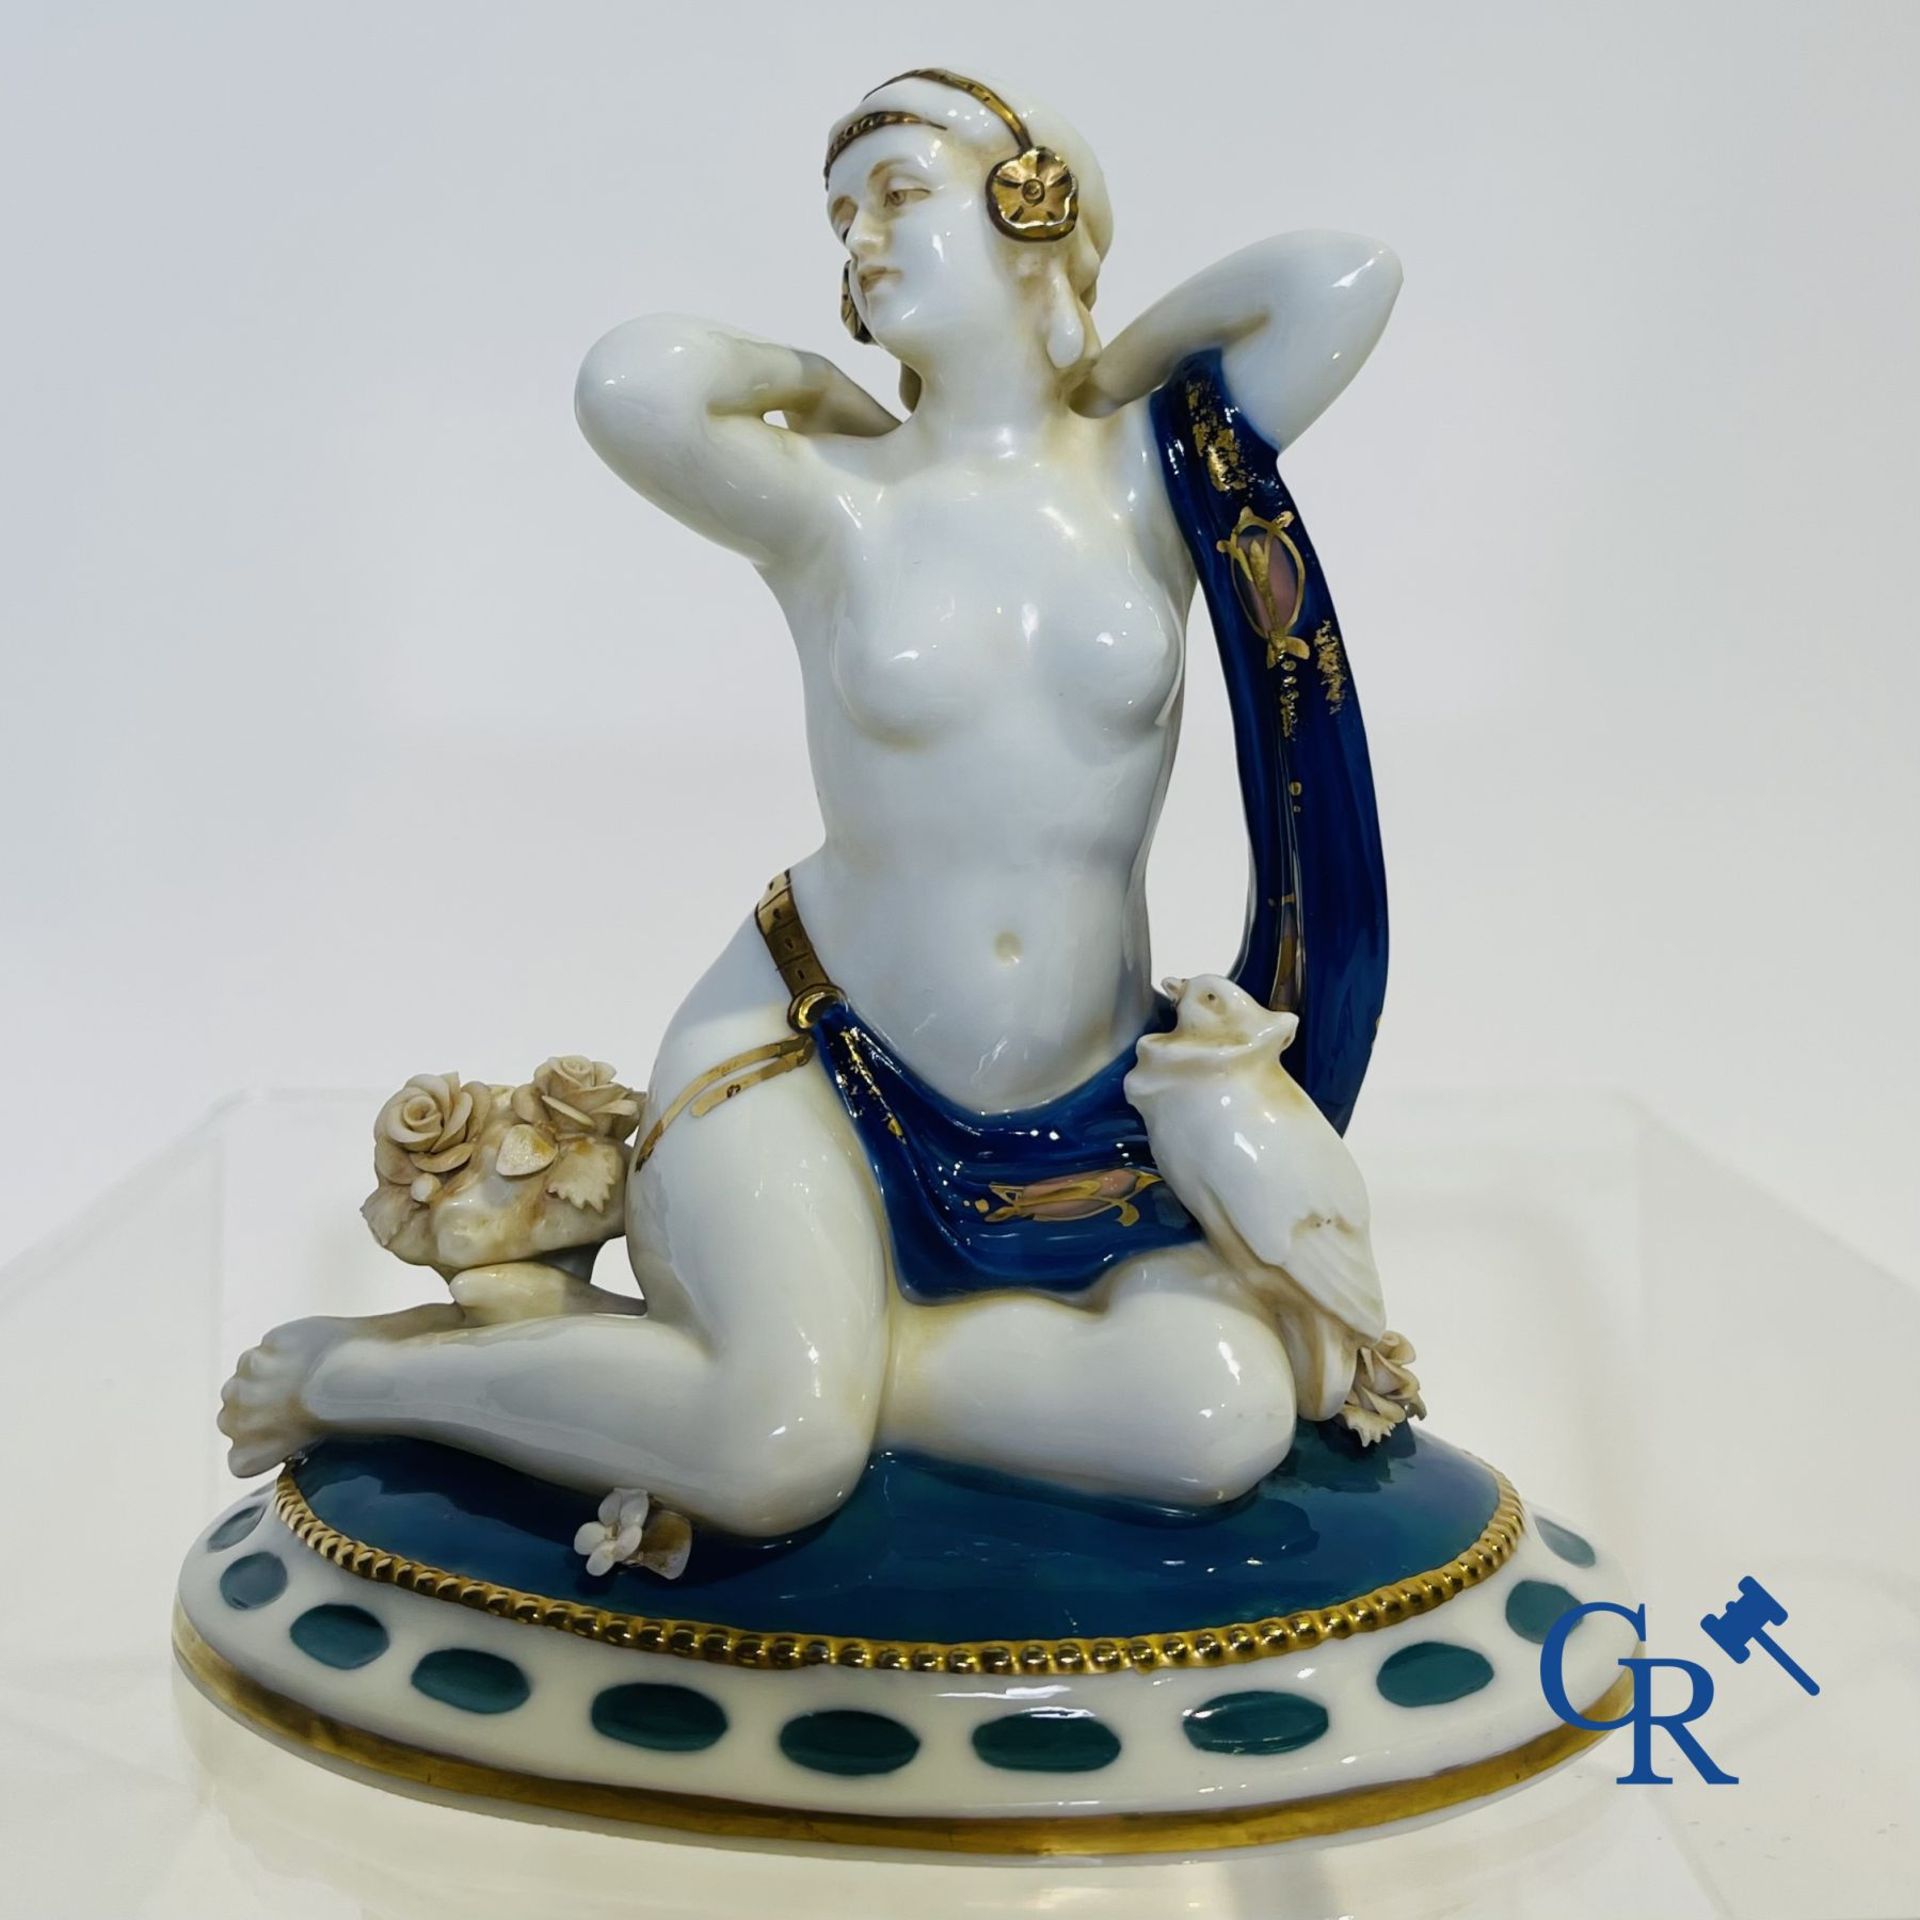 Art deco: An art deco sculpture in finely marked porcelain. - Image 2 of 9